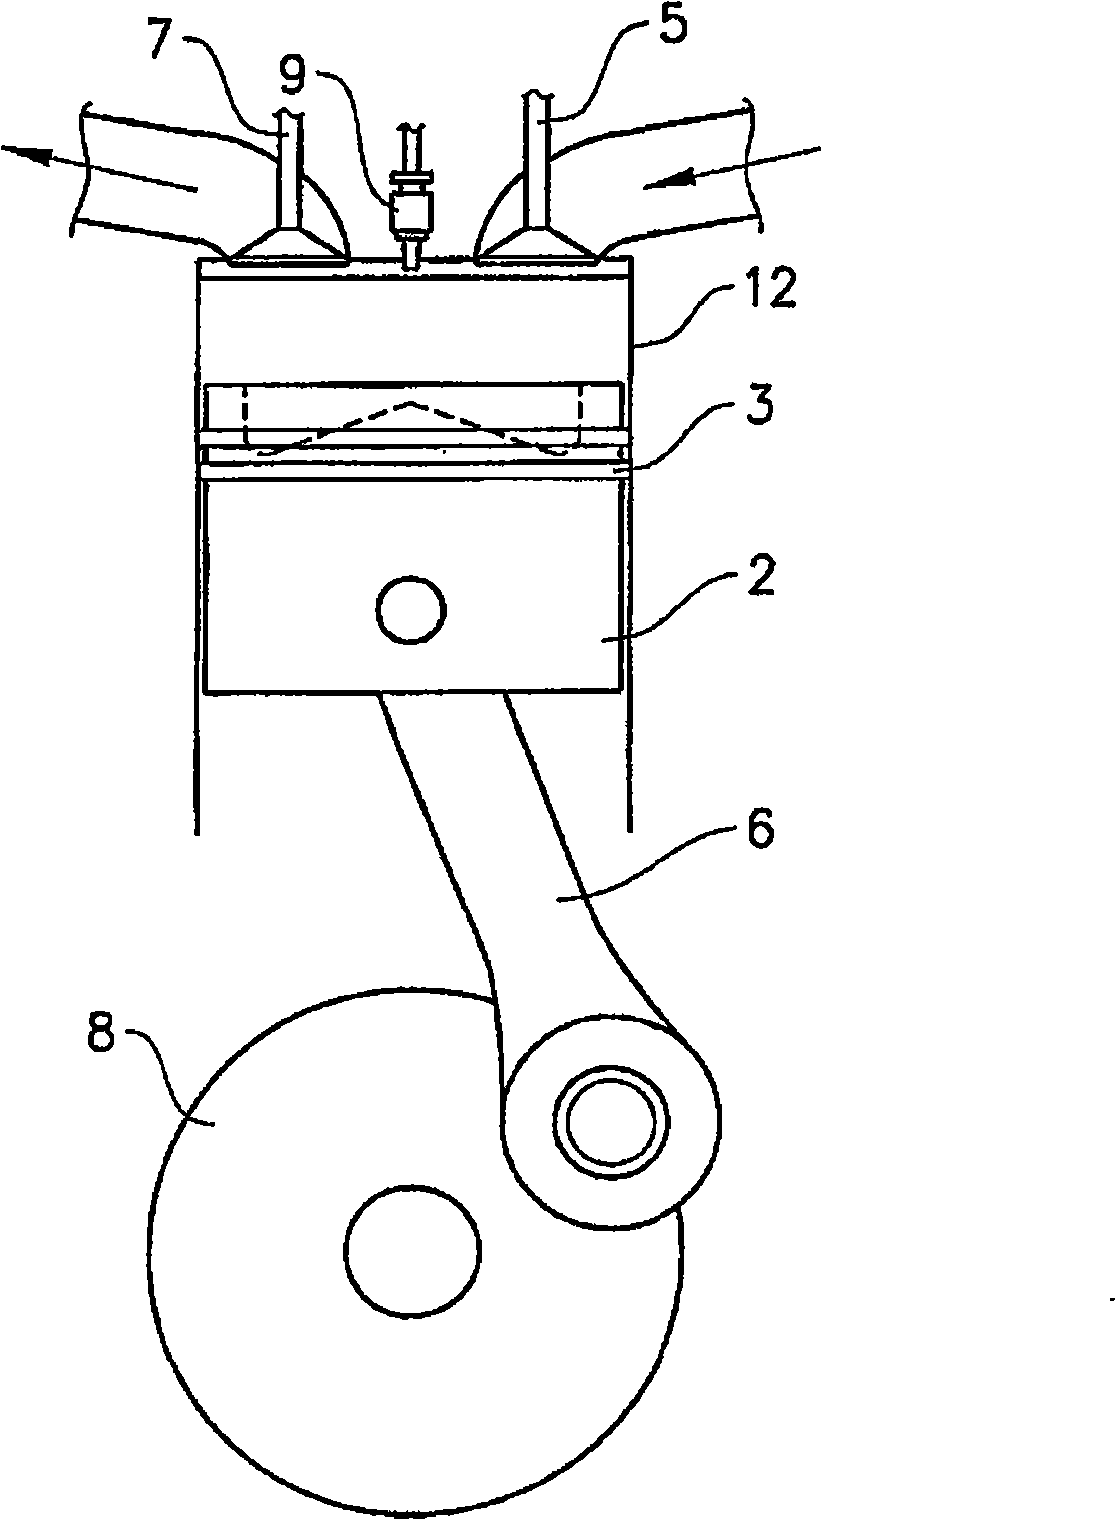 Method for operating internal-combustion engines